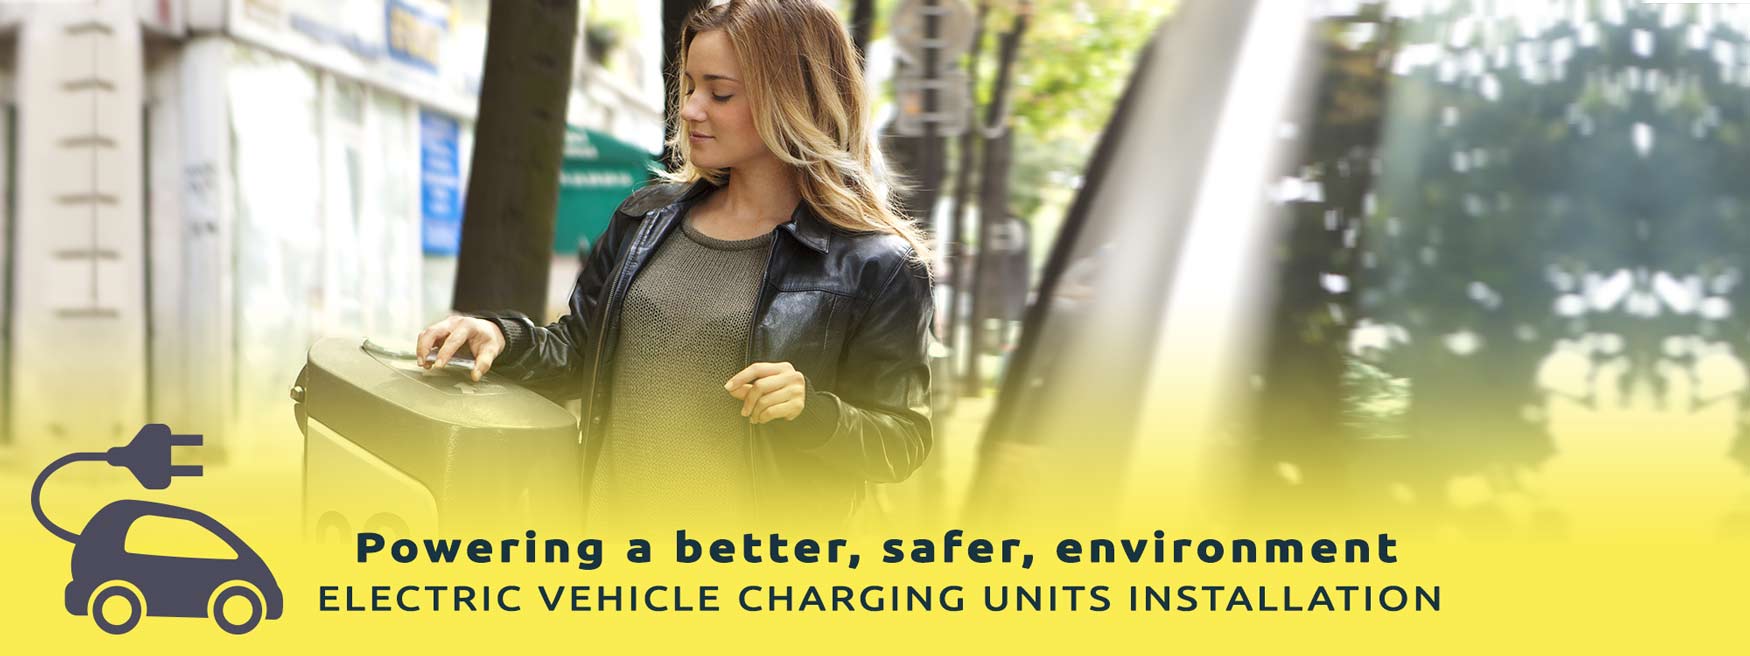 electric vehicle charging unit installations 